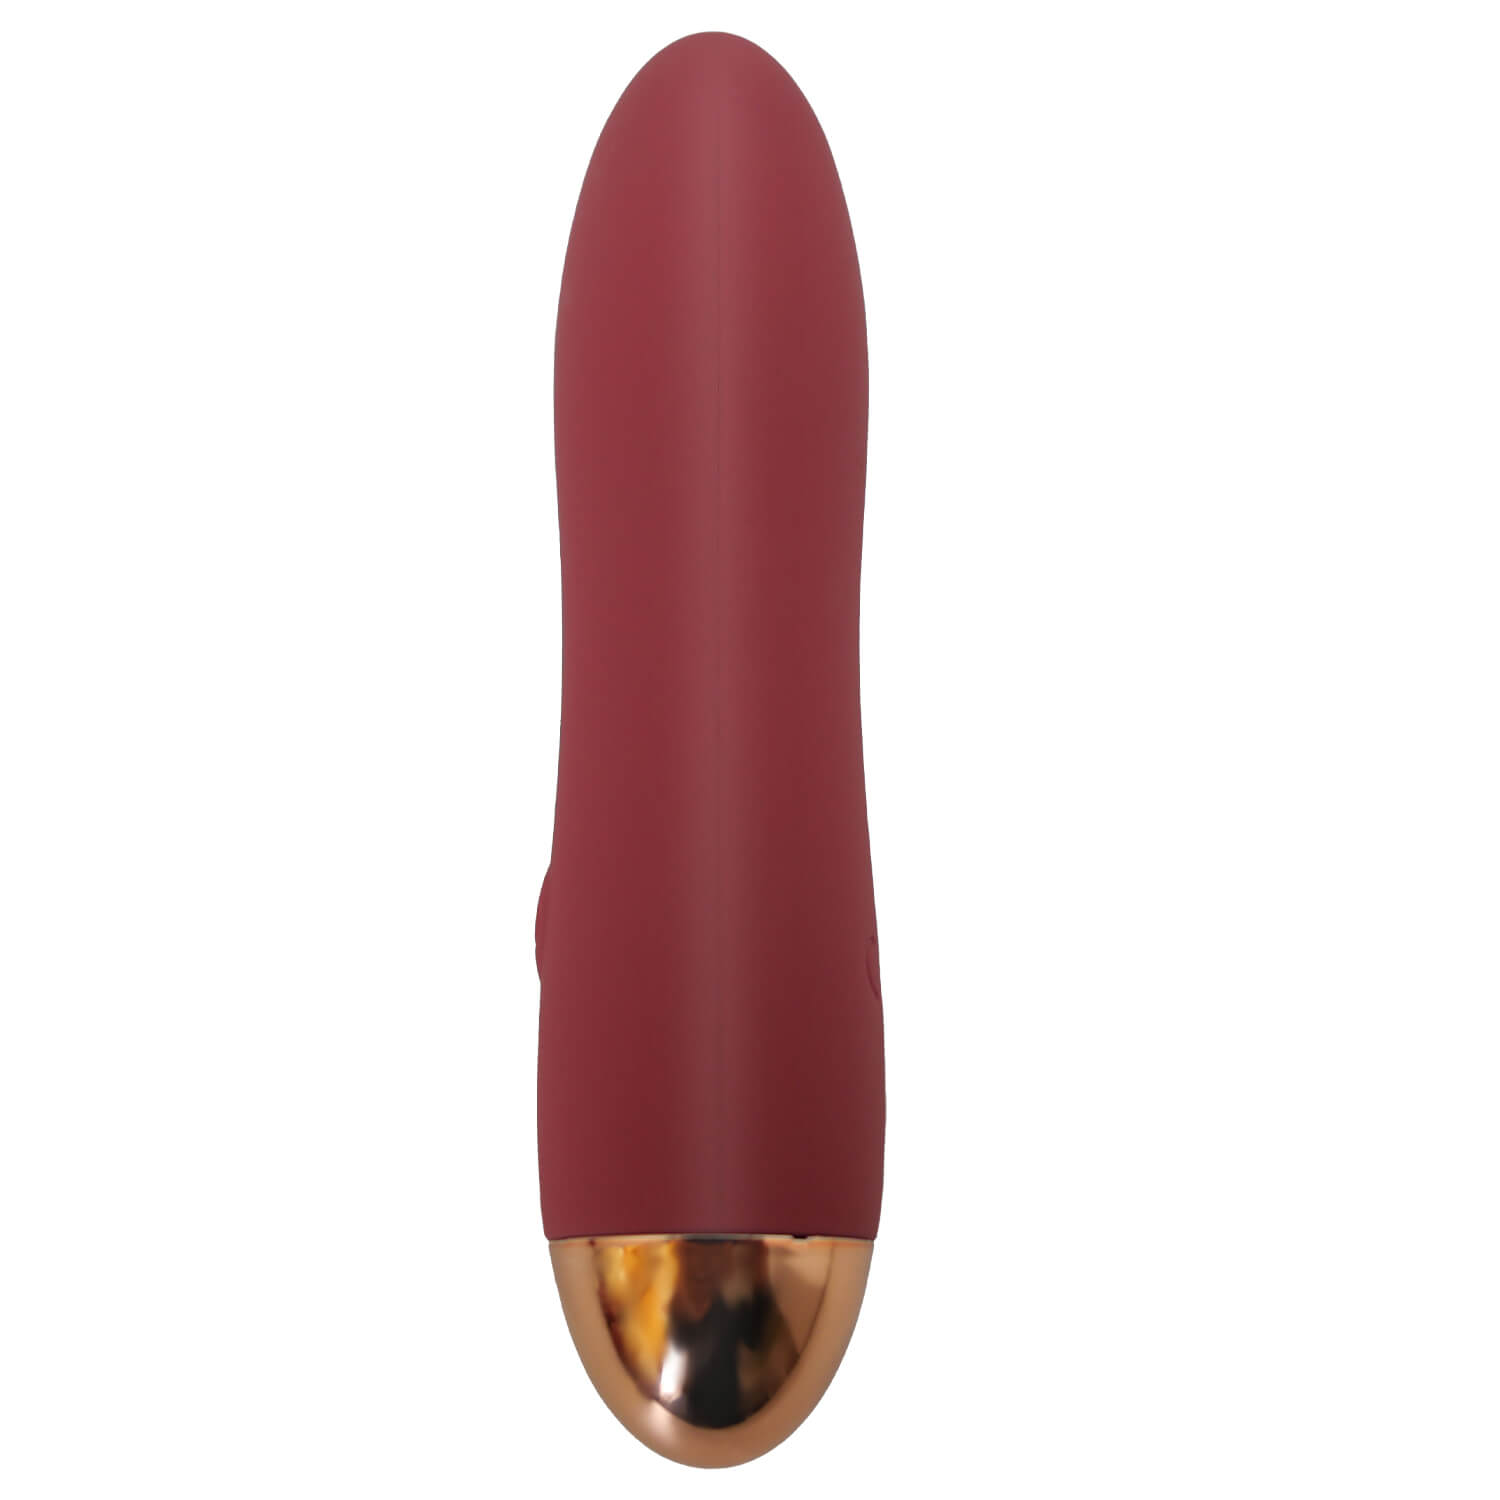 Vibrator bullet toy red color